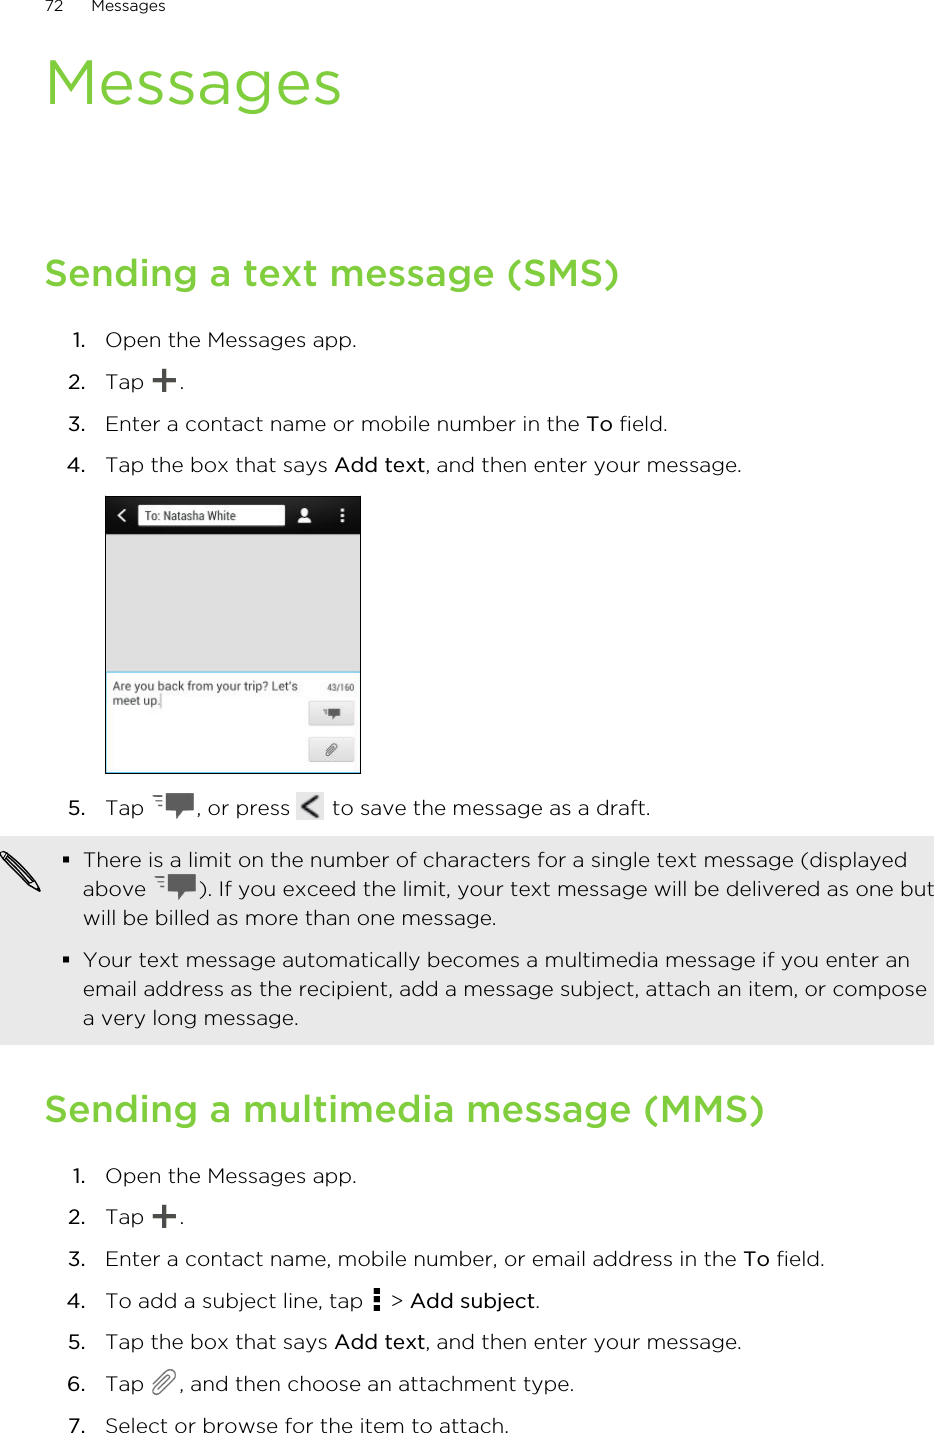 MessagesSending a text message (SMS)1. Open the Messages app.2. Tap  .3. Enter a contact name or mobile number in the To field.4. Tap the box that says Add text, and then enter your message. 5. Tap  , or press   to save the message as a draft. §There is a limit on the number of characters for a single text message (displayedabove  ). If you exceed the limit, your text message will be delivered as one butwill be billed as more than one message.§Your text message automatically becomes a multimedia message if you enter anemail address as the recipient, add a message subject, attach an item, or composea very long message.Sending a multimedia message (MMS)1. Open the Messages app.2. Tap  .3. Enter a contact name, mobile number, or email address in the To field.4. To add a subject line, tap   &gt; Add subject.5. Tap the box that says Add text, and then enter your message.6. Tap  , and then choose an attachment type.7. Select or browse for the item to attach.72 Messages